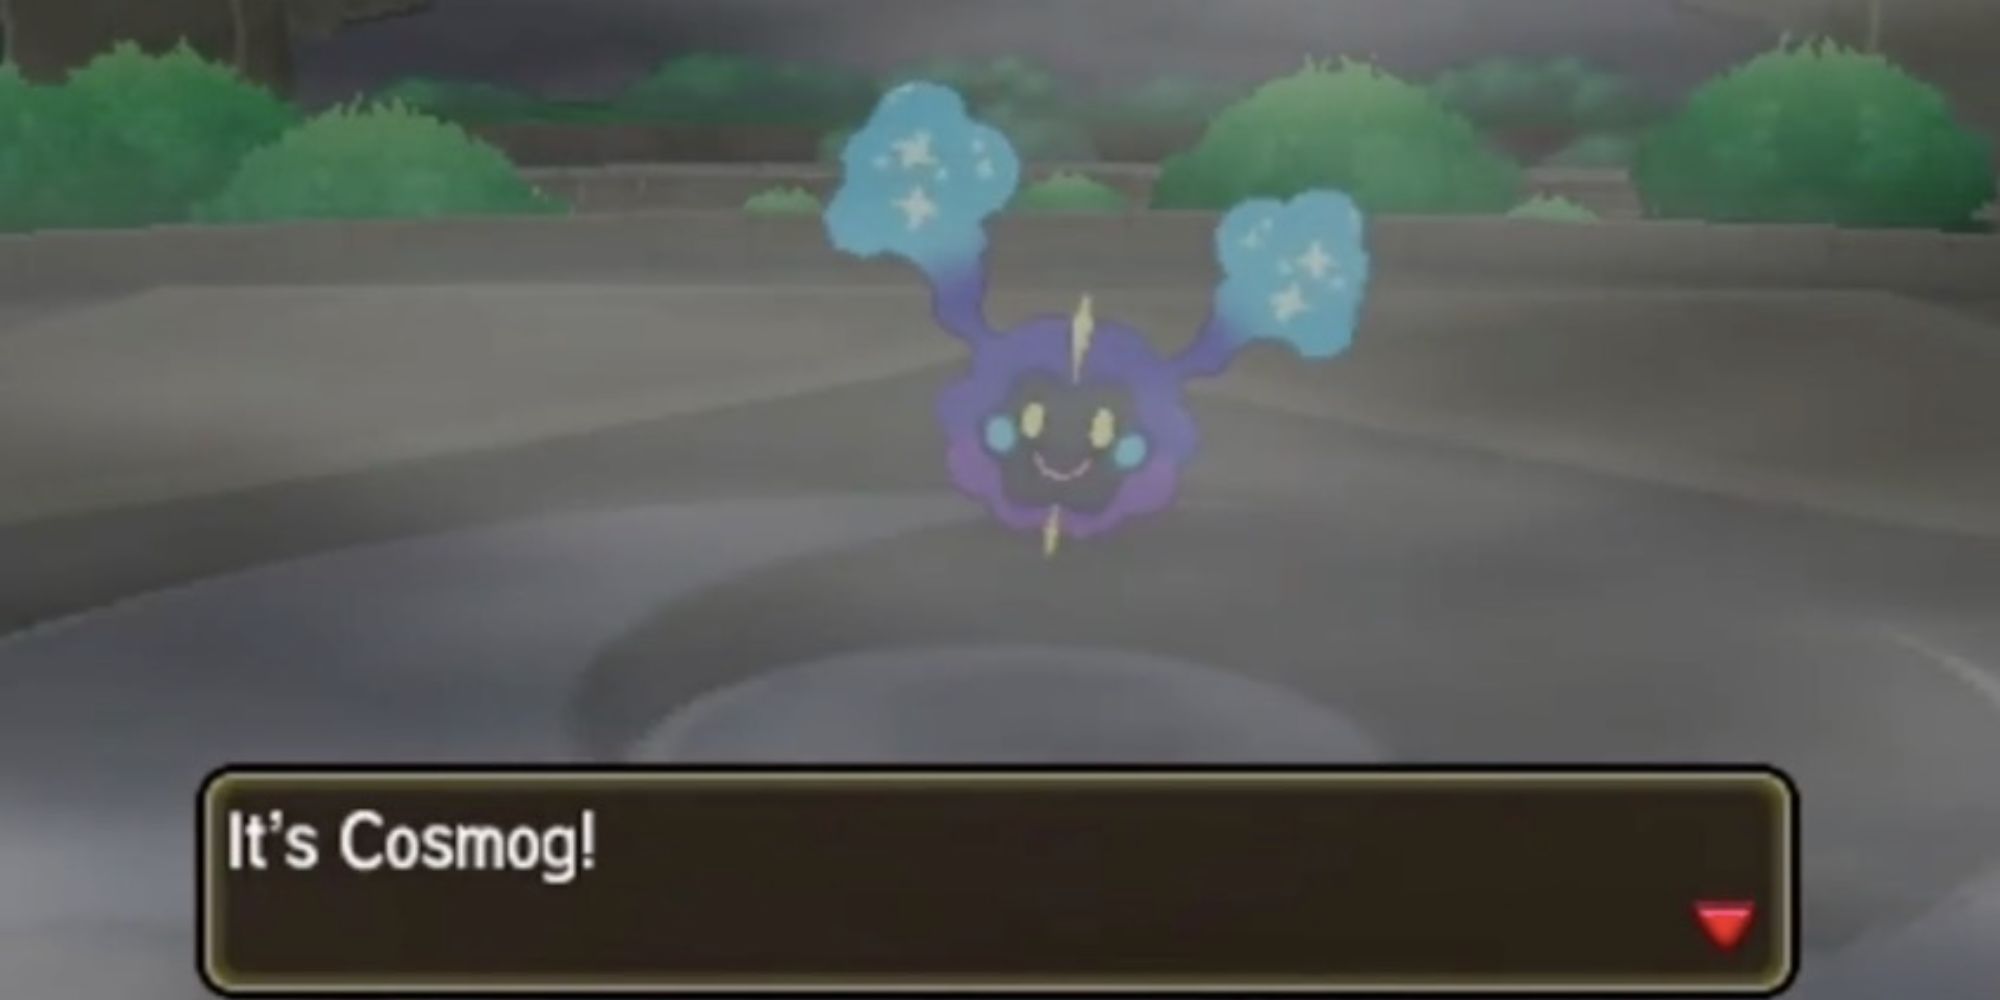 Cosmog appearing in the mist, and a dialogue box saying 'it's cosmog'